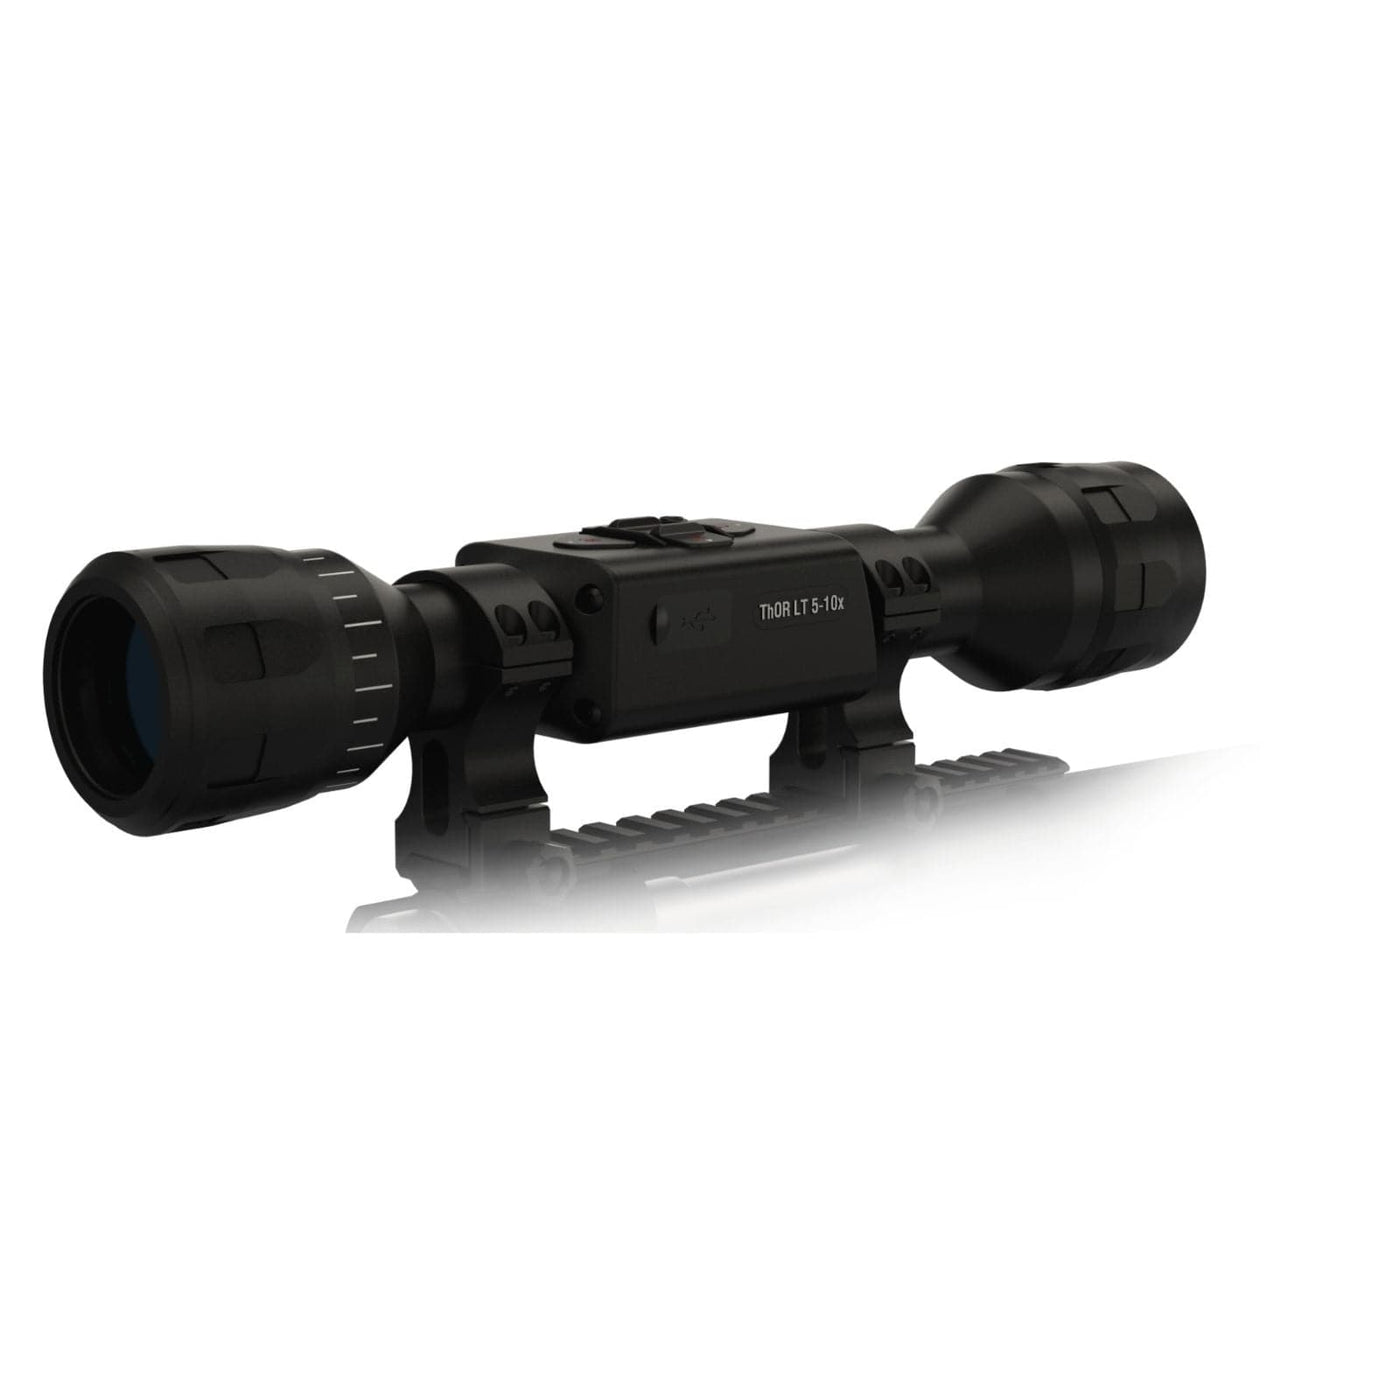 ATN ATN Thor-LT 5-10x 160x120 Thermal Rifle Scope Nightvision And Thermal